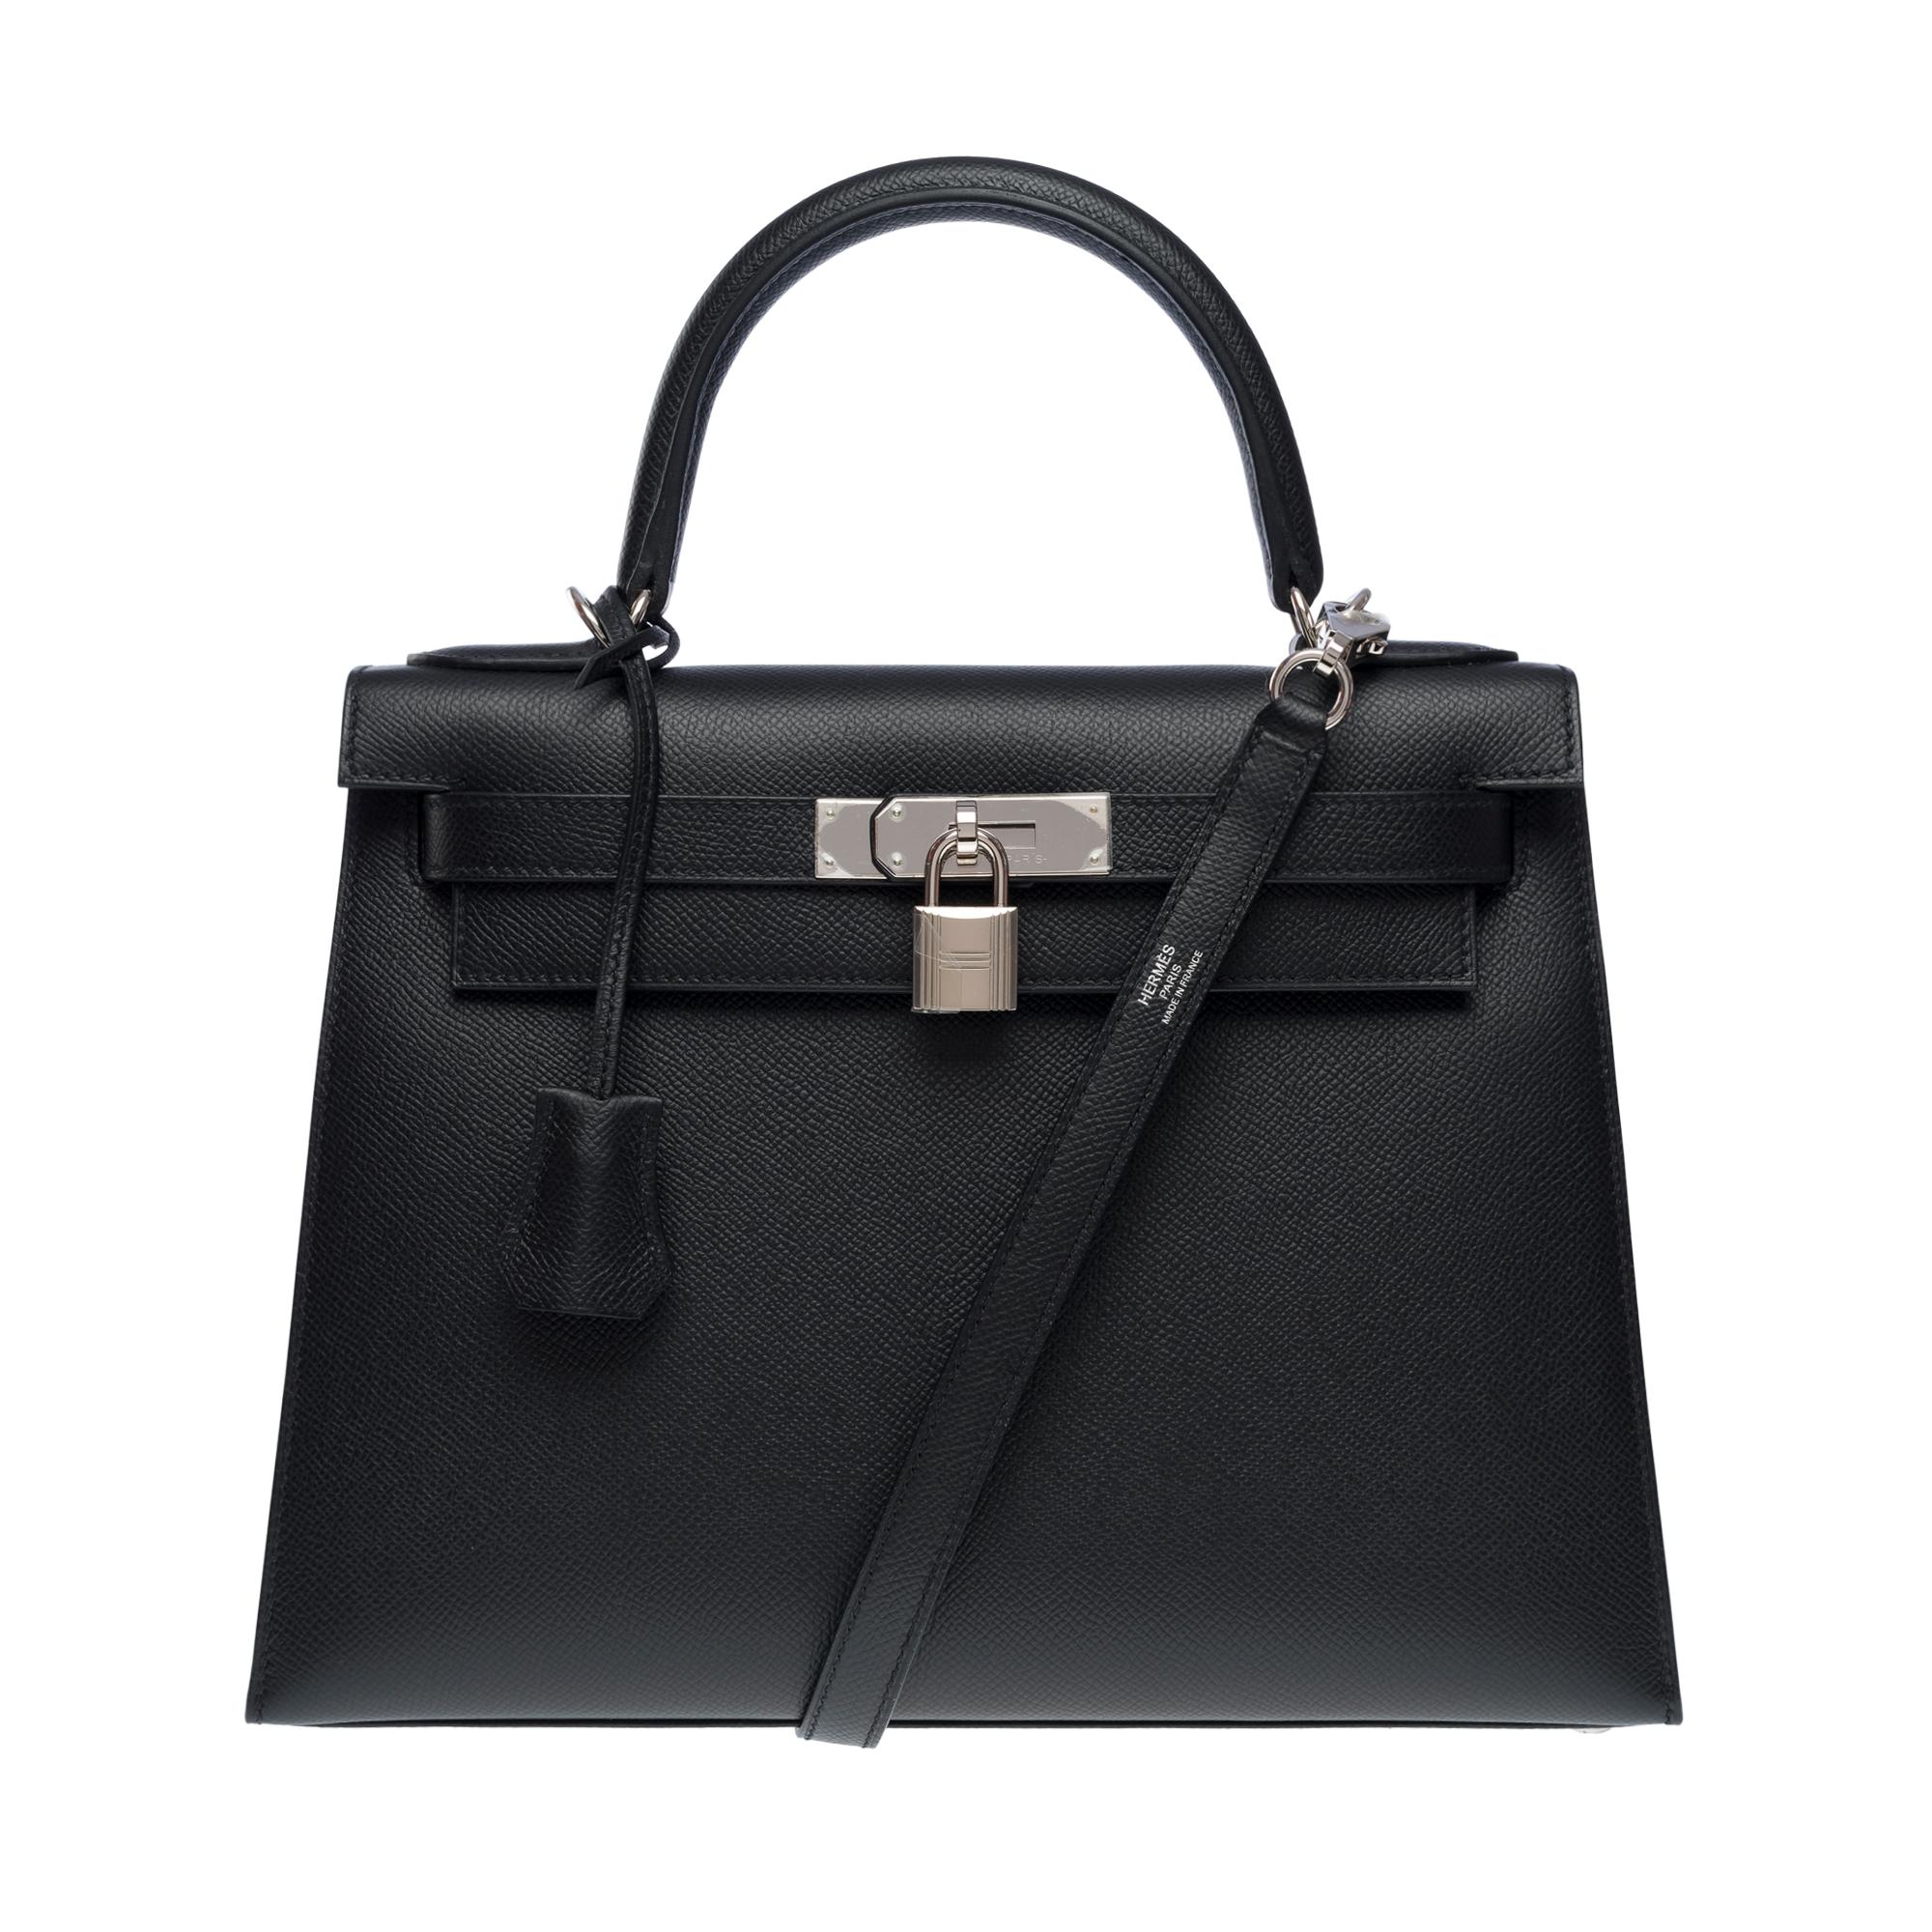 Amazing Hermes Kelly 28 sellier strap in black Epsom leather , palladium silver hardware, black leather handle, removable black leather handle for hand, shoulder or crossbody carry

Flap closure
Black leather inner lining, one zip pocket, two patch